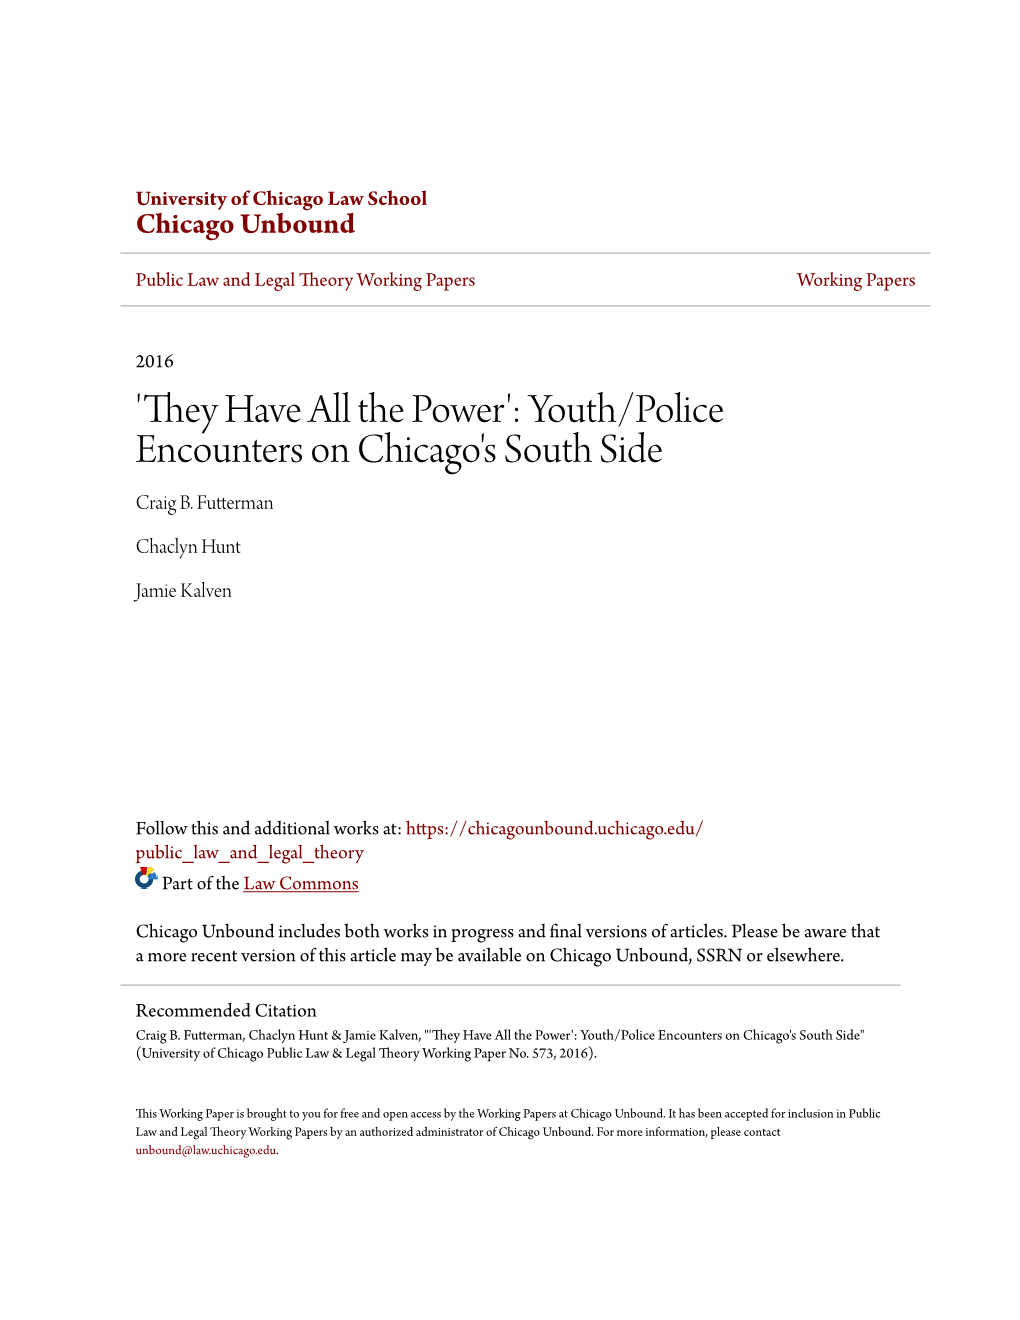 'They Have All the Power': Youth/Police Encounters on Chicago's South Side Craig B